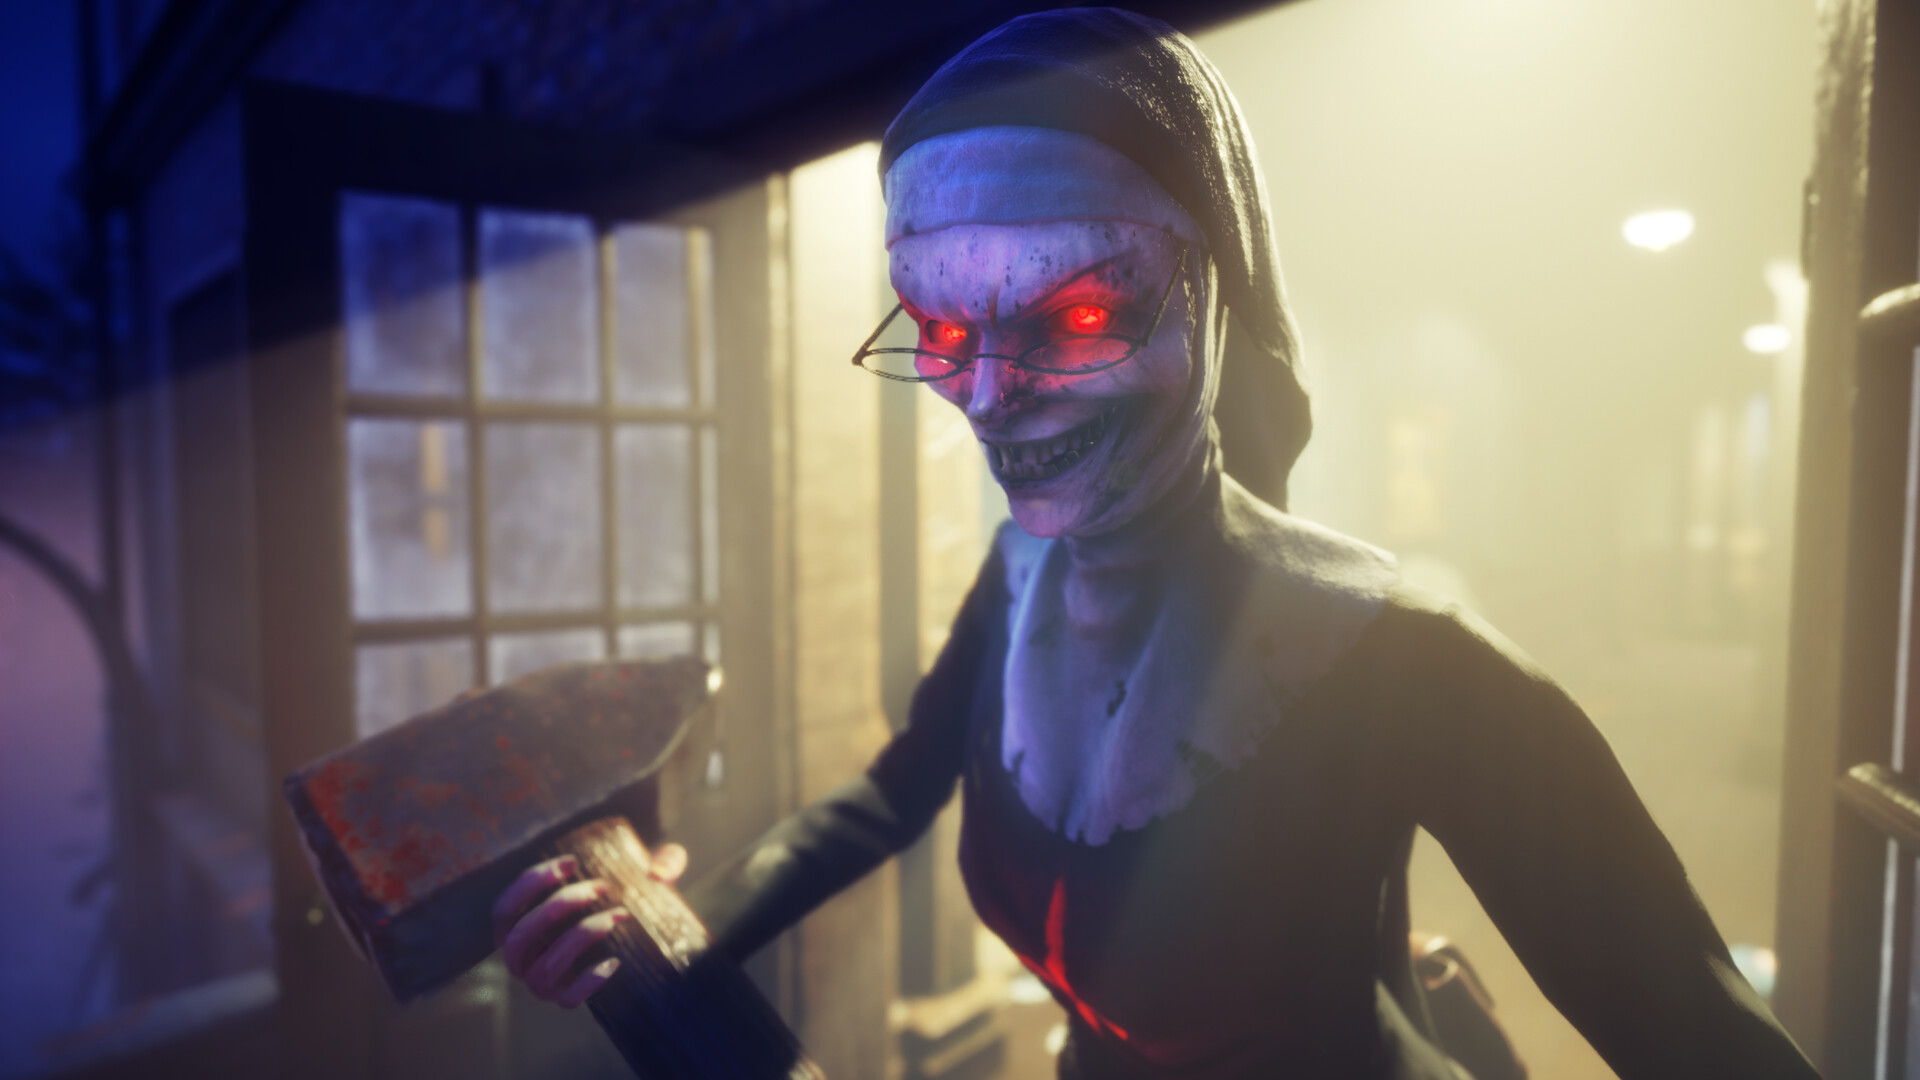 Evil Nun: The Broken Mask Free Download for PC